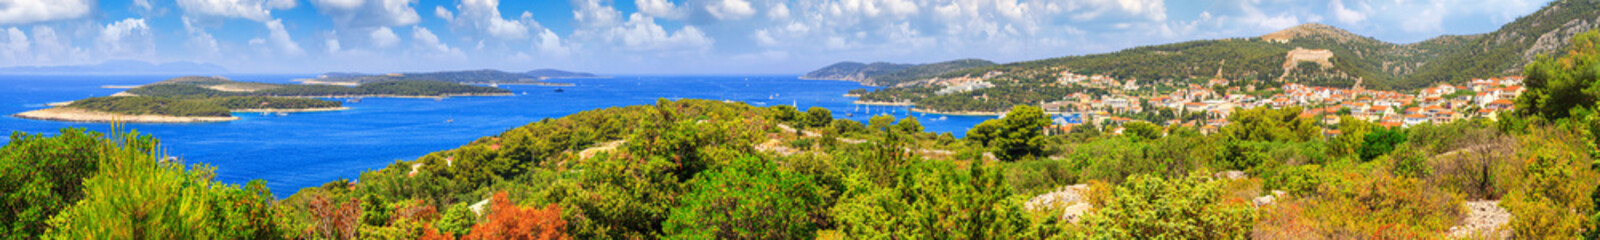 Coastal summer landscape, panorama - view from the island of Hvar to the Paklinski Islands and the...